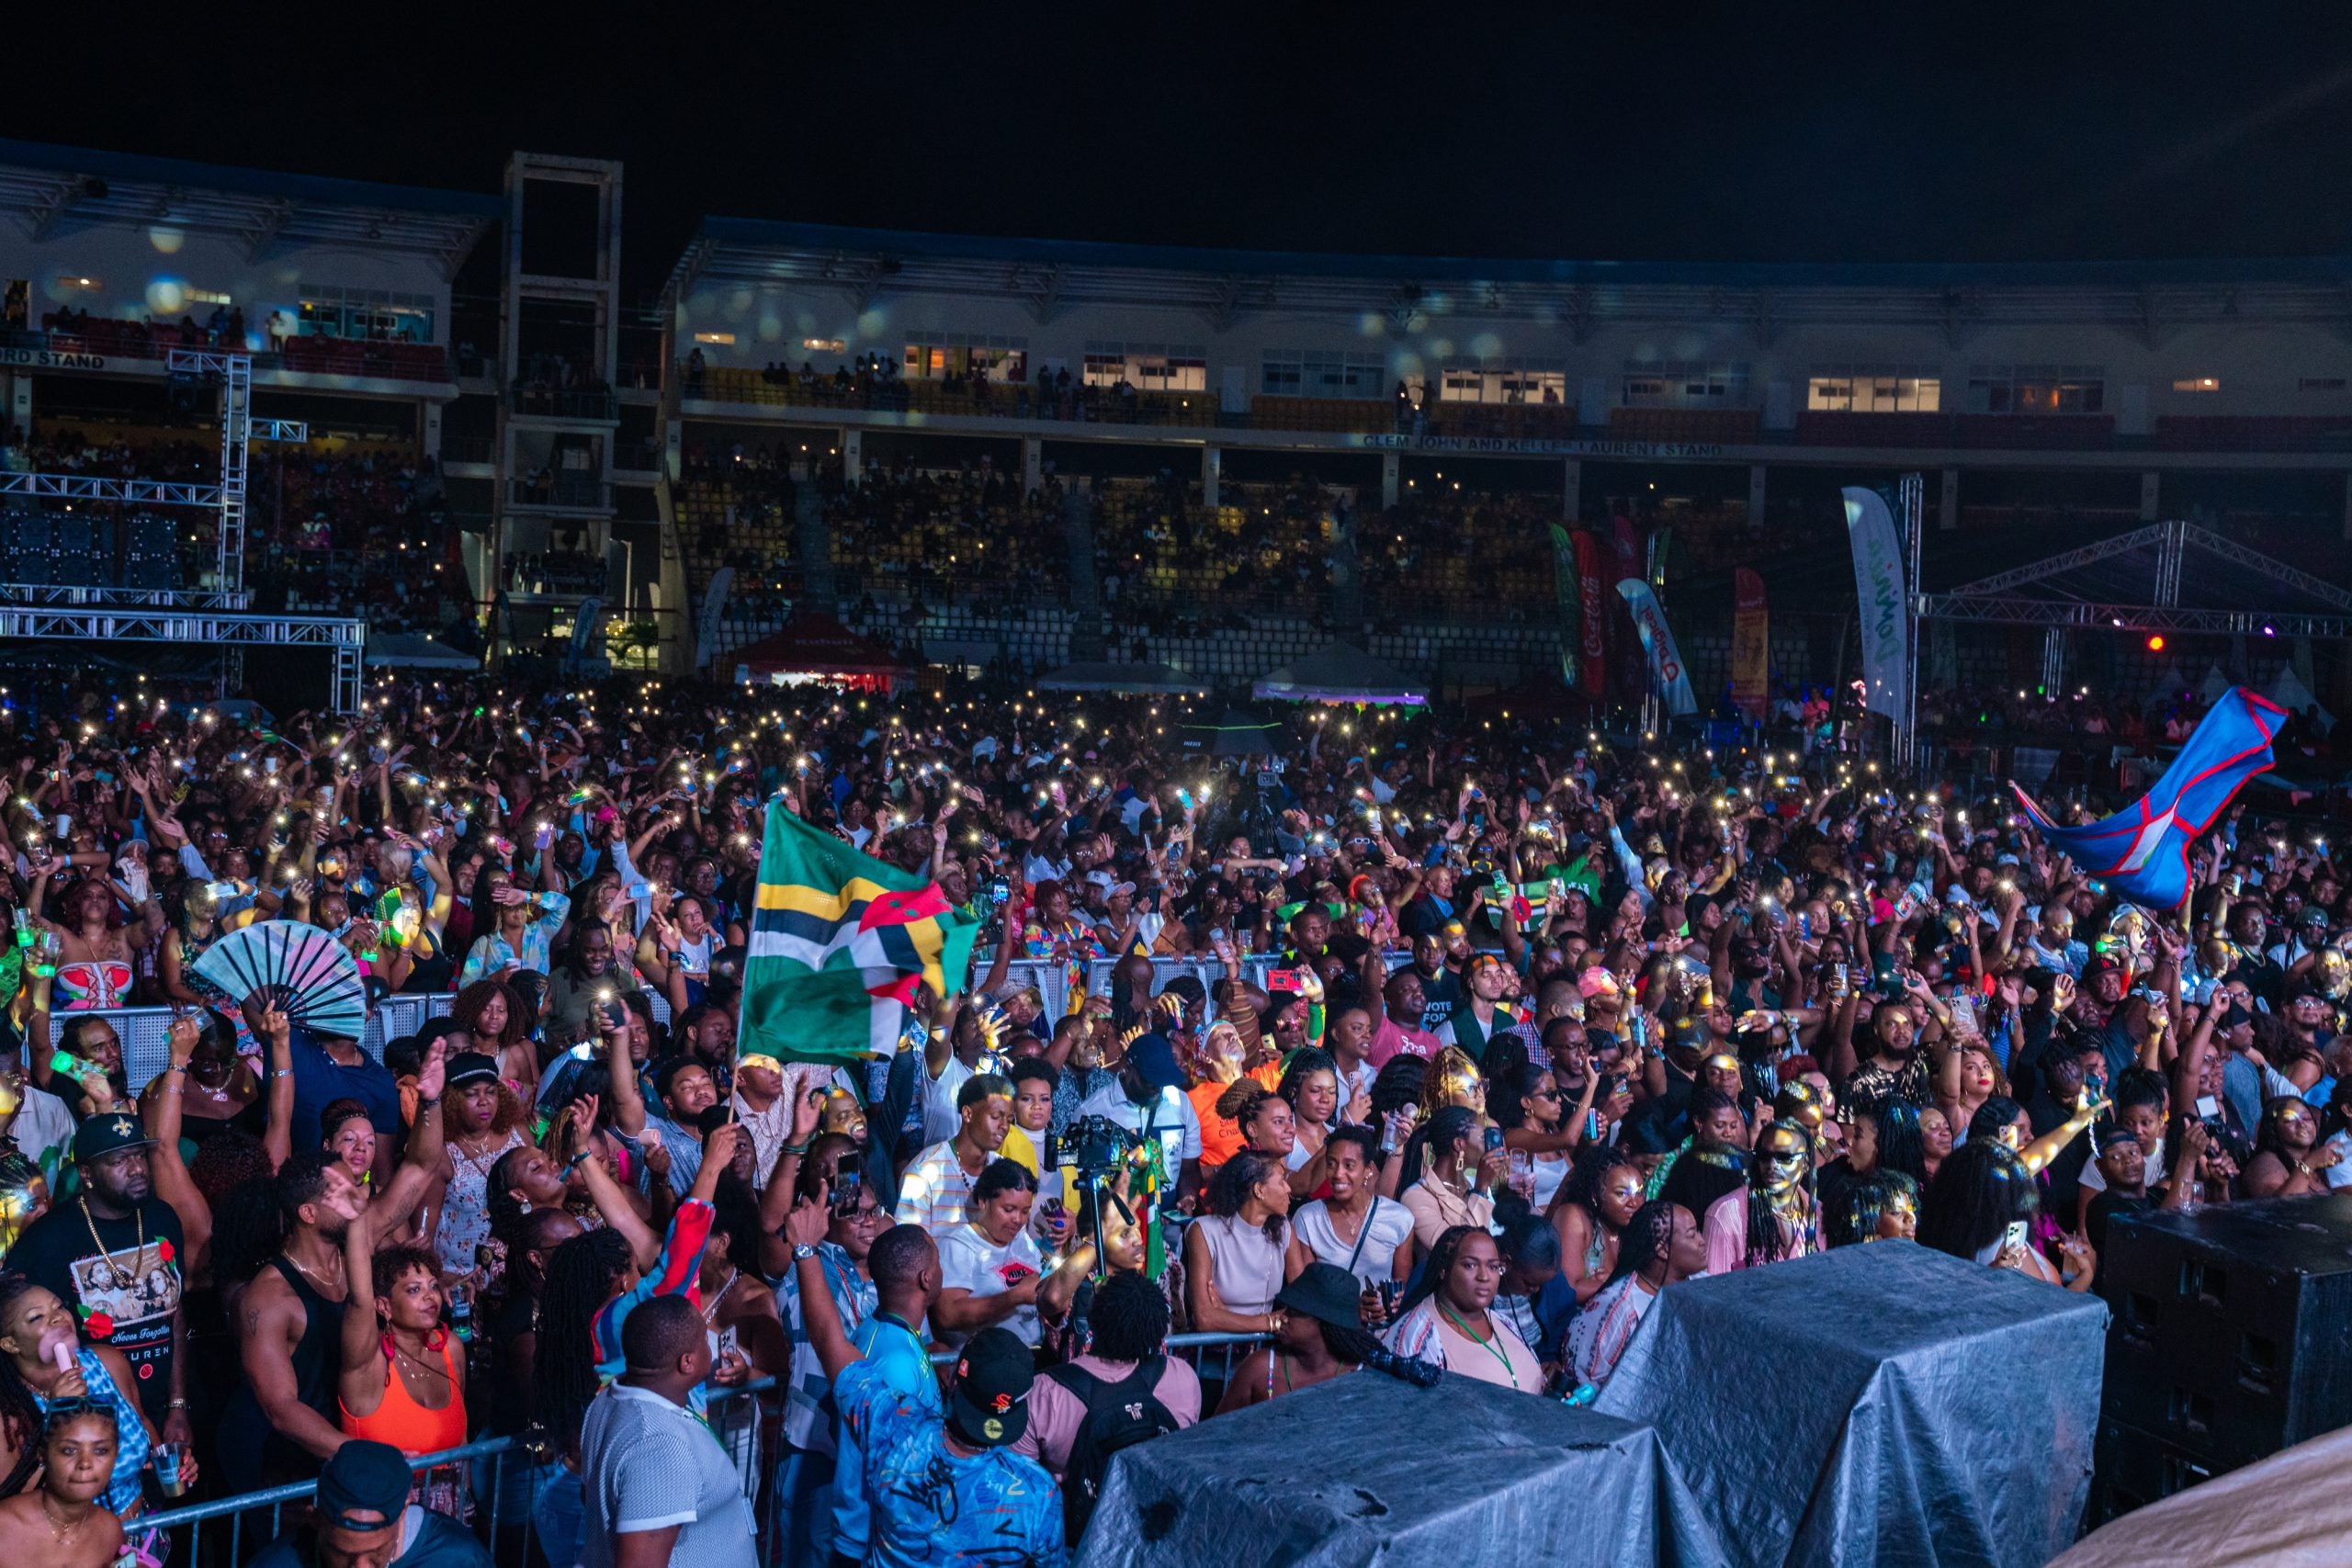 The World Creole Music Festival Is A Dynamic Cultural Journey Everyone Should Experience.  Here’s Why